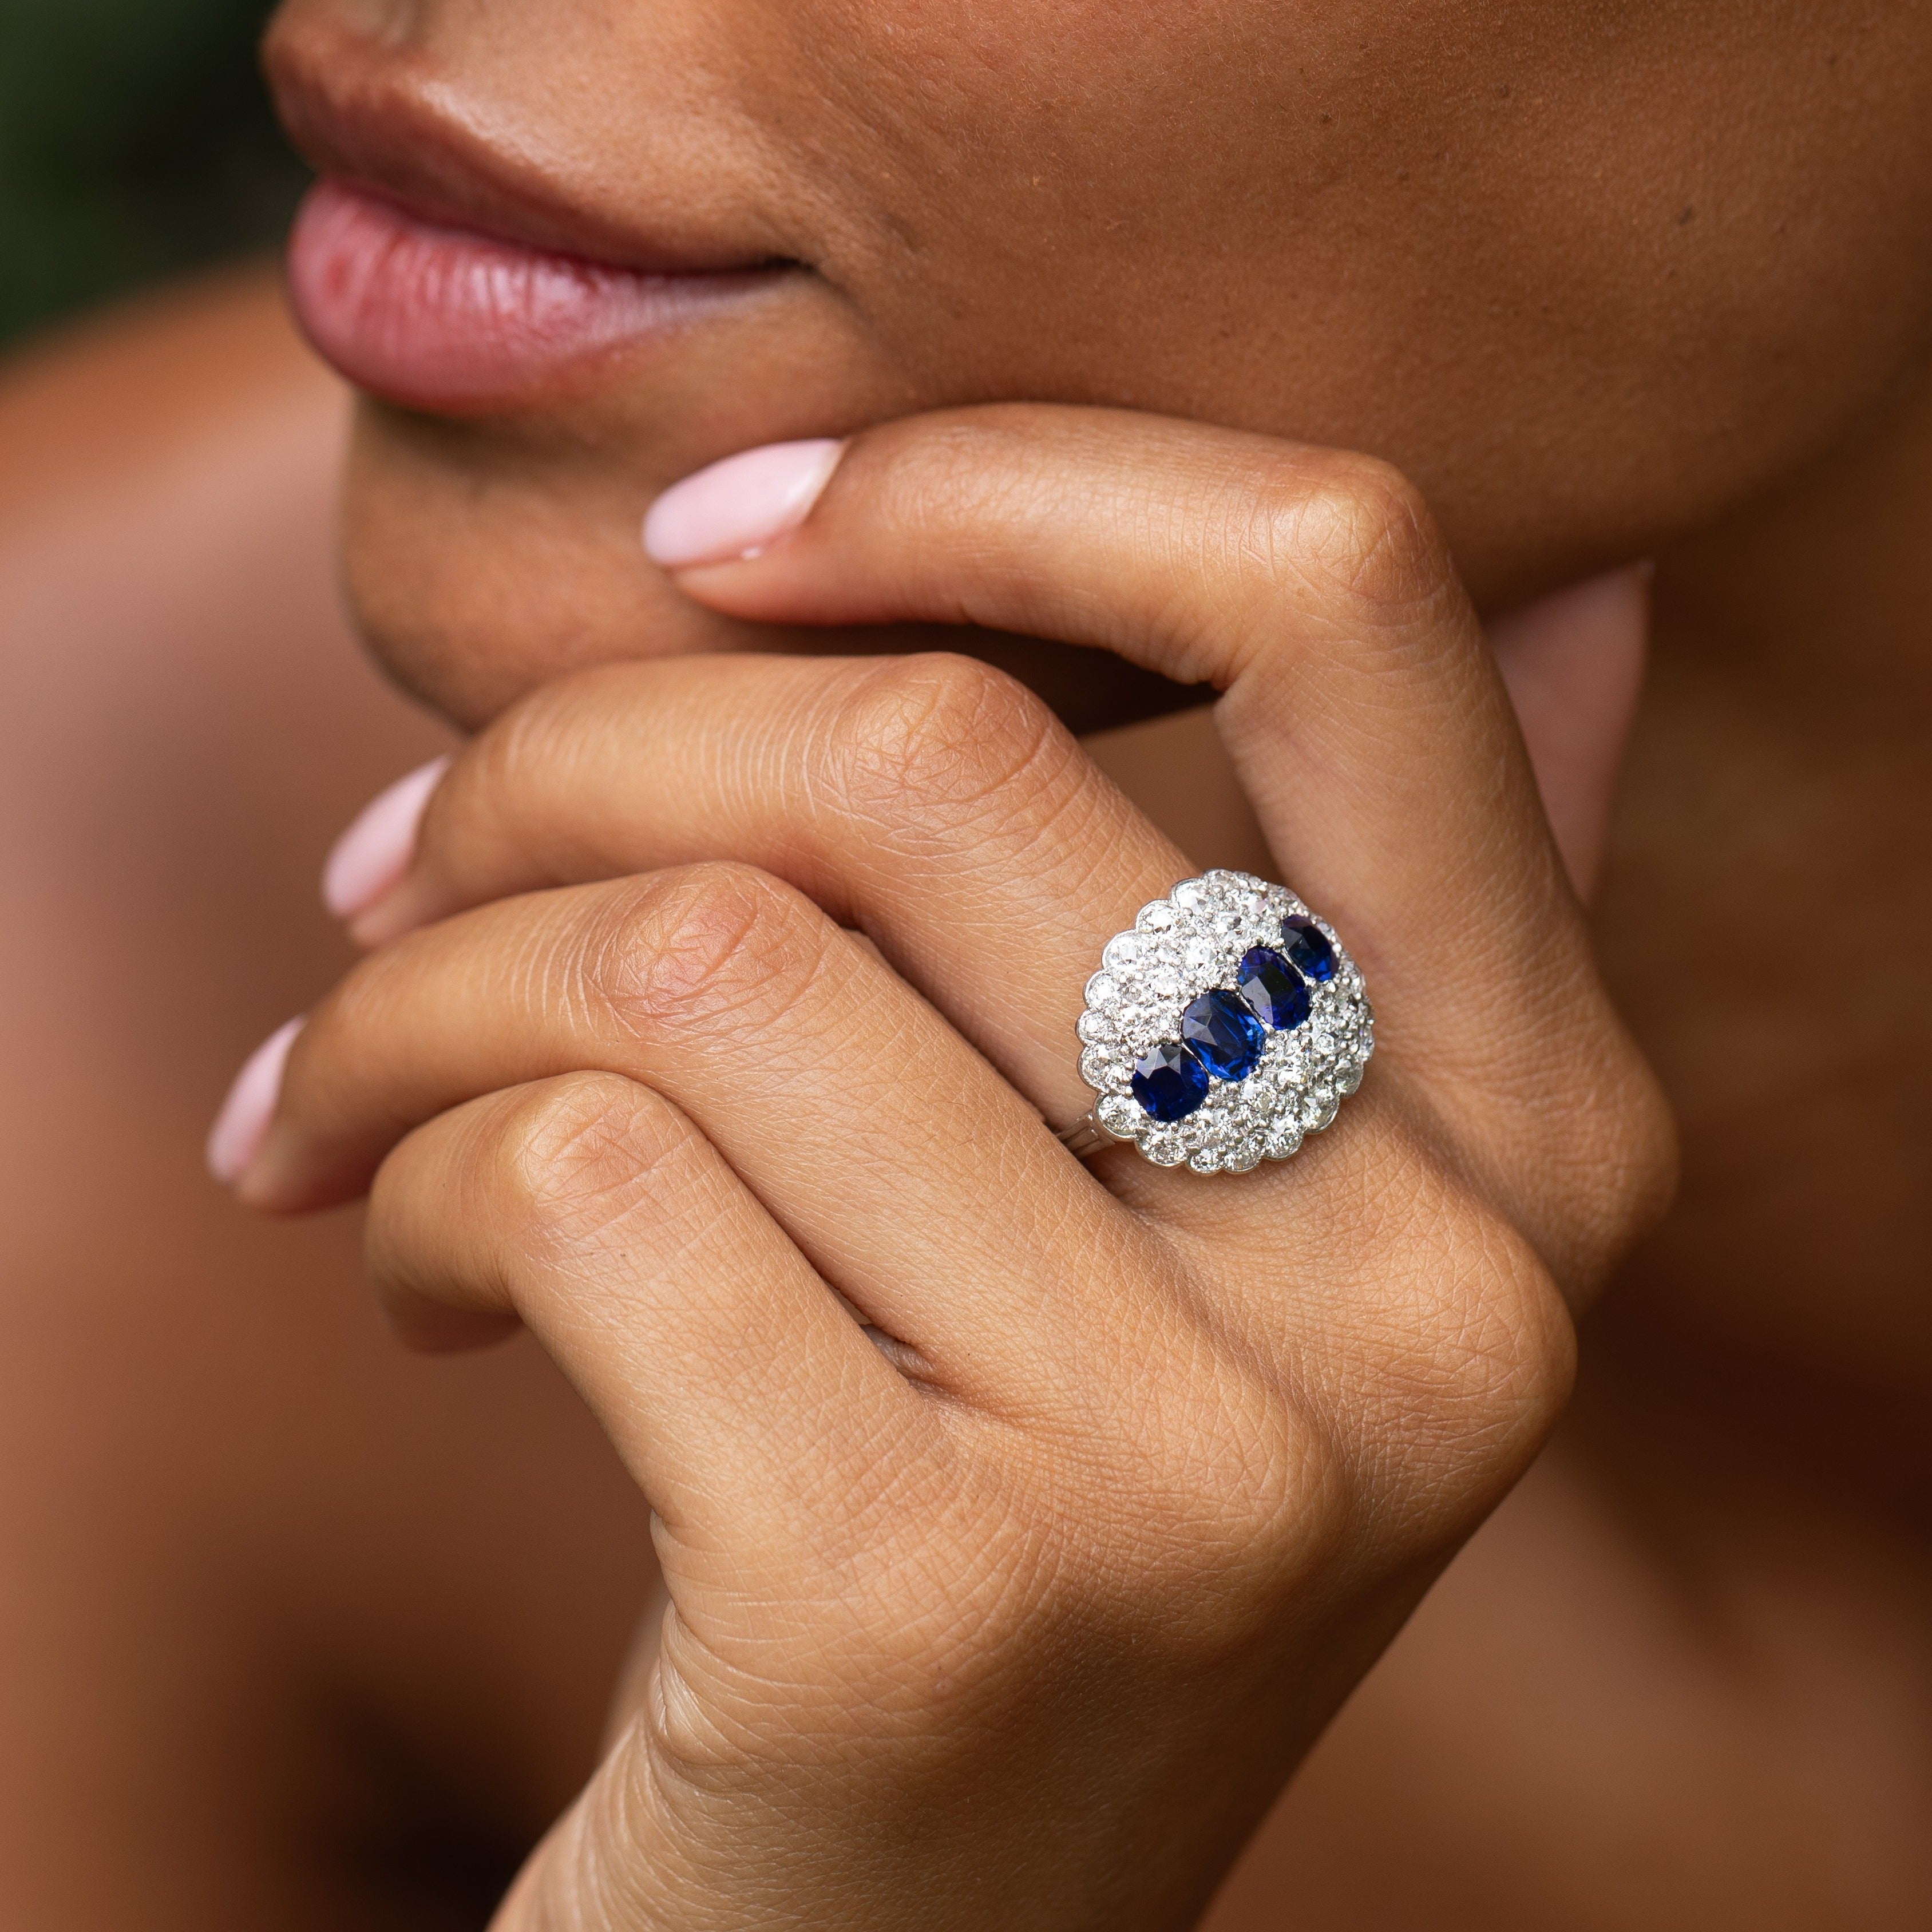 1920s Natural Sapphire, Diamond, and Platinum Cluster Ring